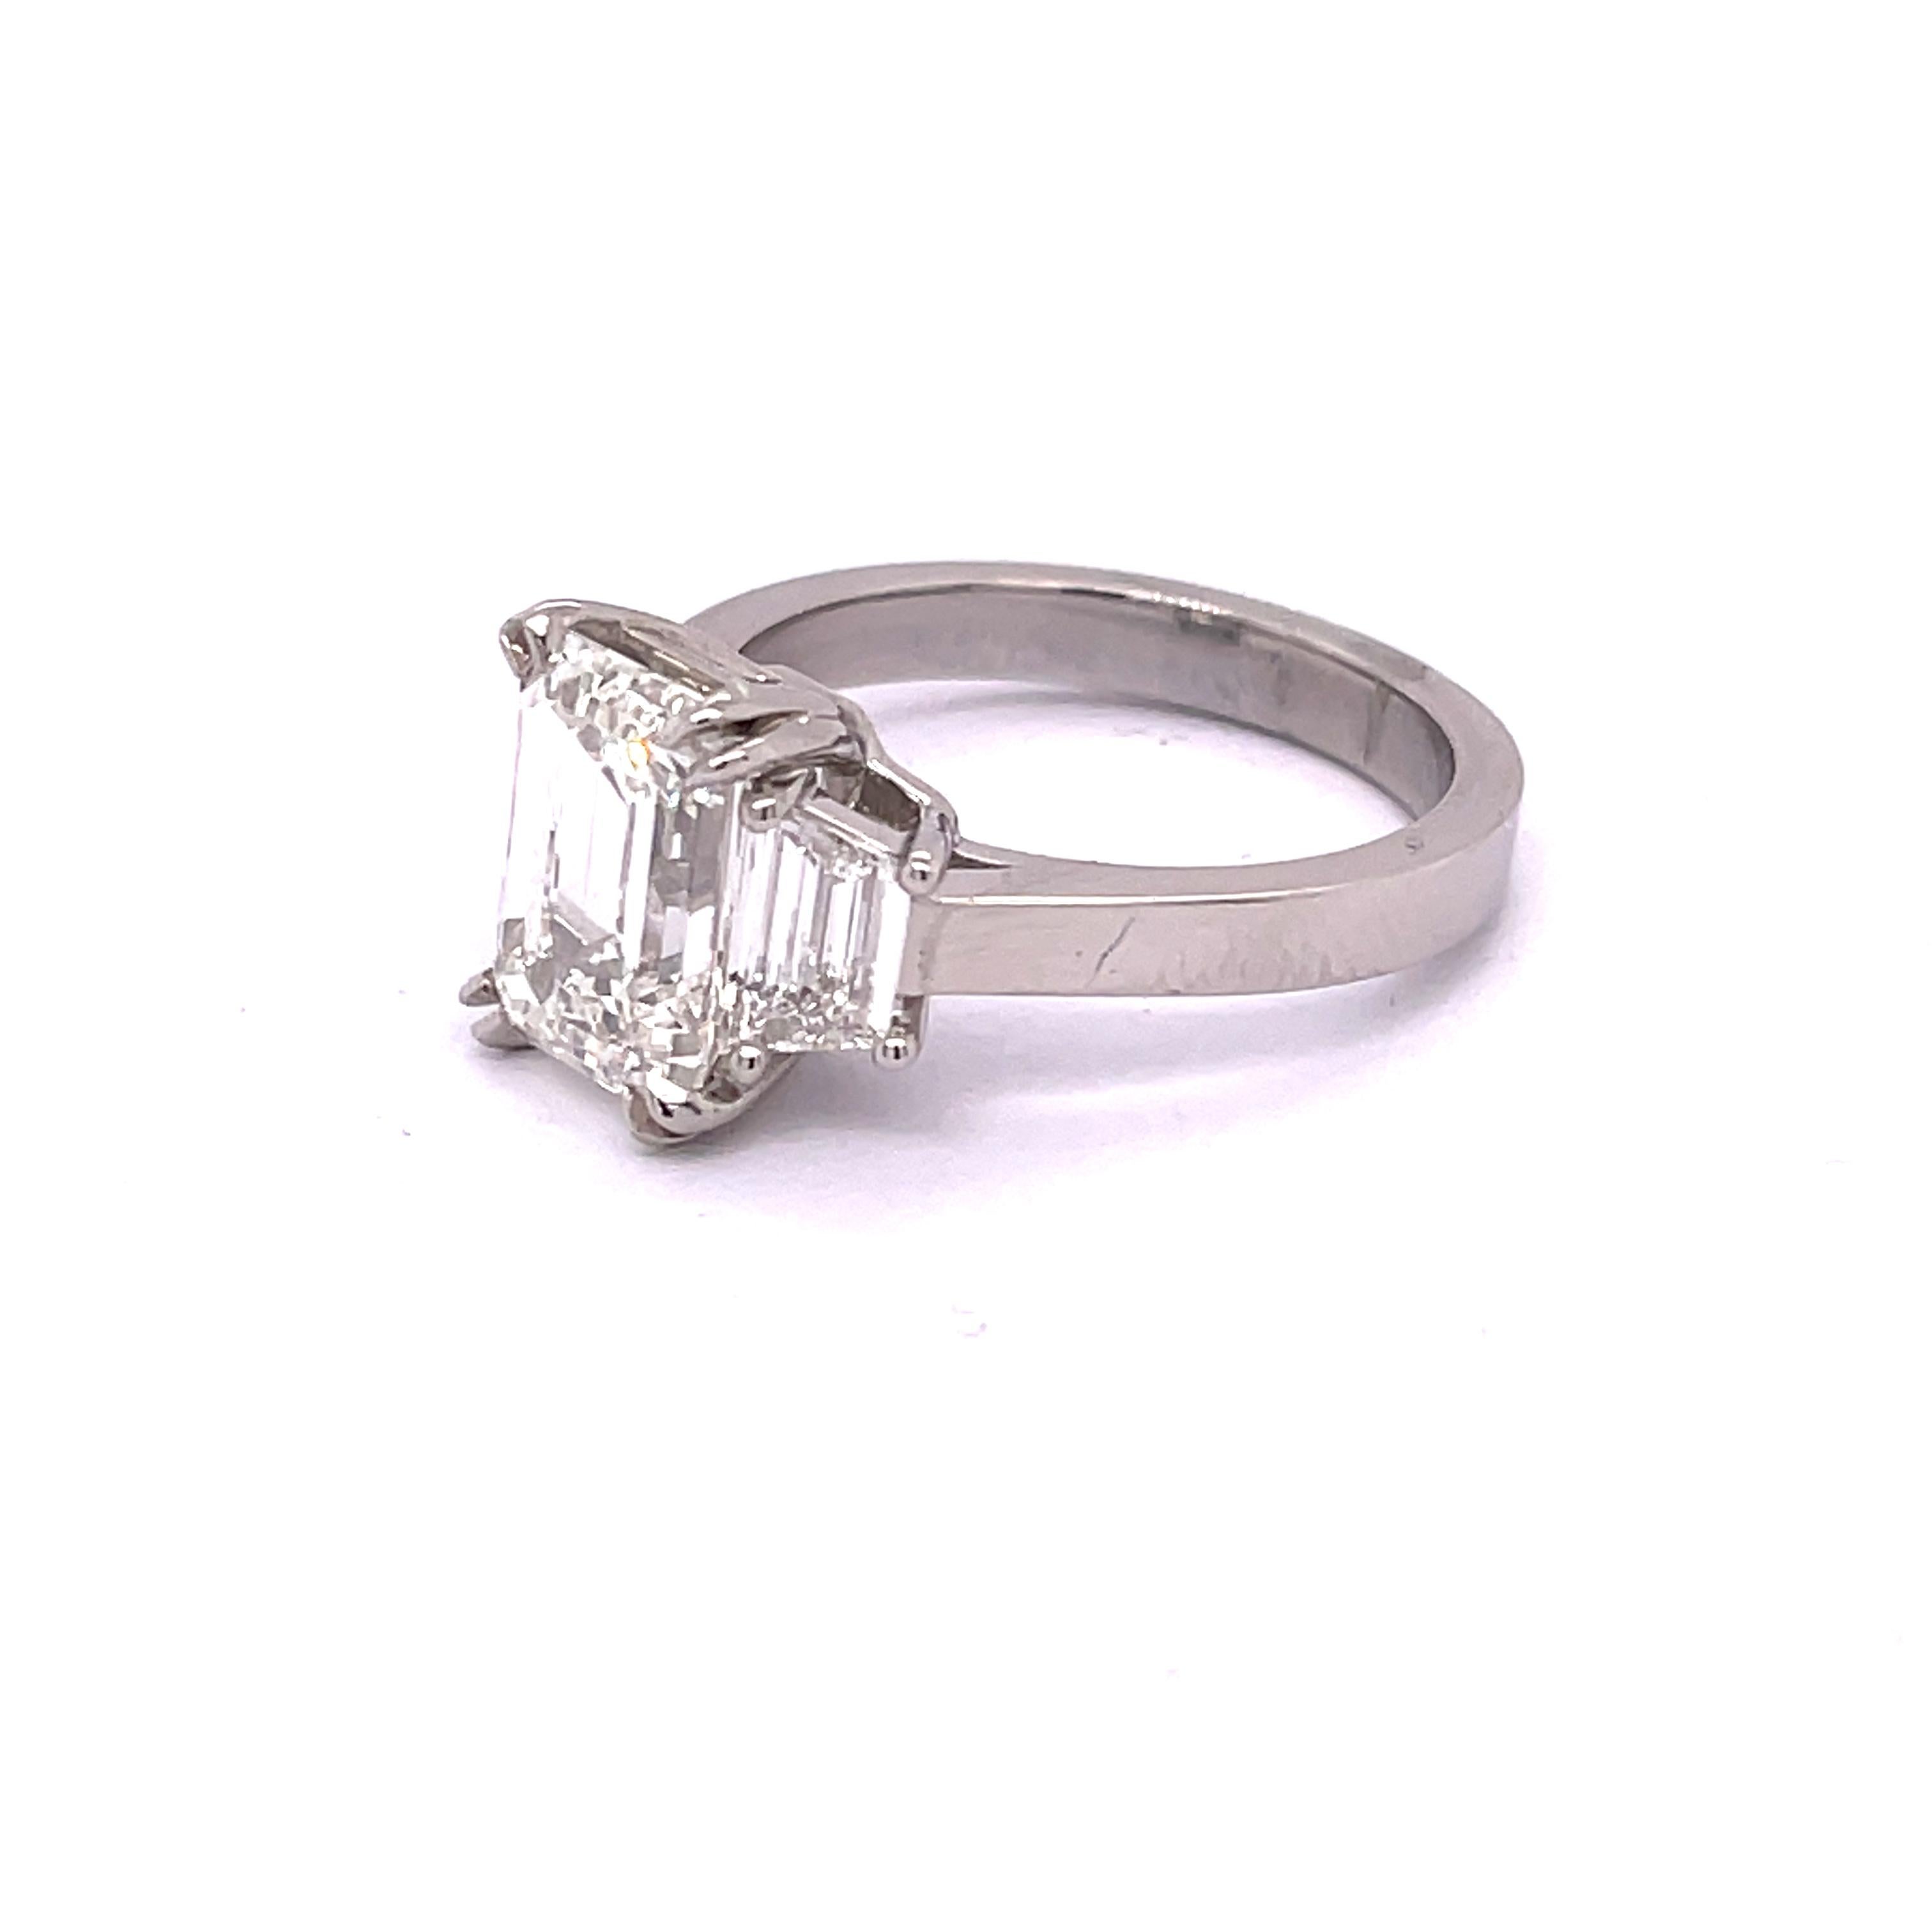 Dazzling GIA Certified 3.05 Emerald Cut Engagement Ring 

Setting:
Platinum

Center Stone: 
Emerald Cut Diamond 3.05ct
Clarity: VS1
Color: H

Side Stones: 
Clarity: VS
Cut: Excellent
The total approximate weight of side stones: 0.65ctw

•Free